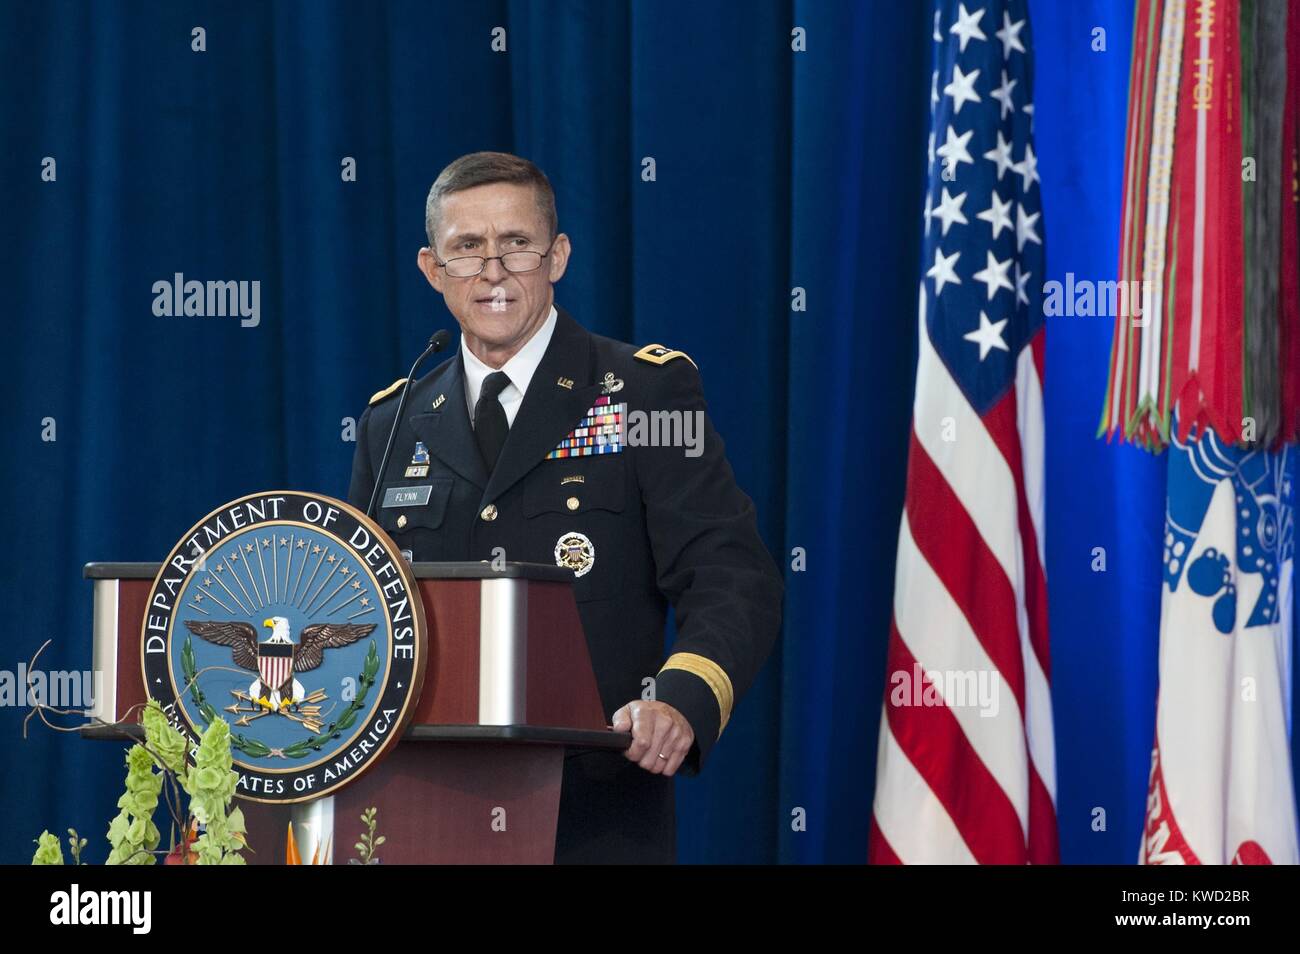 Lt. Gen. Michael Flynn speaks after assuming Directorship of Defense Intelligence Agency, July 24, 2012. He served from July 2012 until August 1914, when he retired from the military. His early departure was, in part, due to his conviction that the danger from radical Islamic terrorism was increasing after the death of Osama bin Laden.  (BSLOC 2017 20 120) Stock Photo